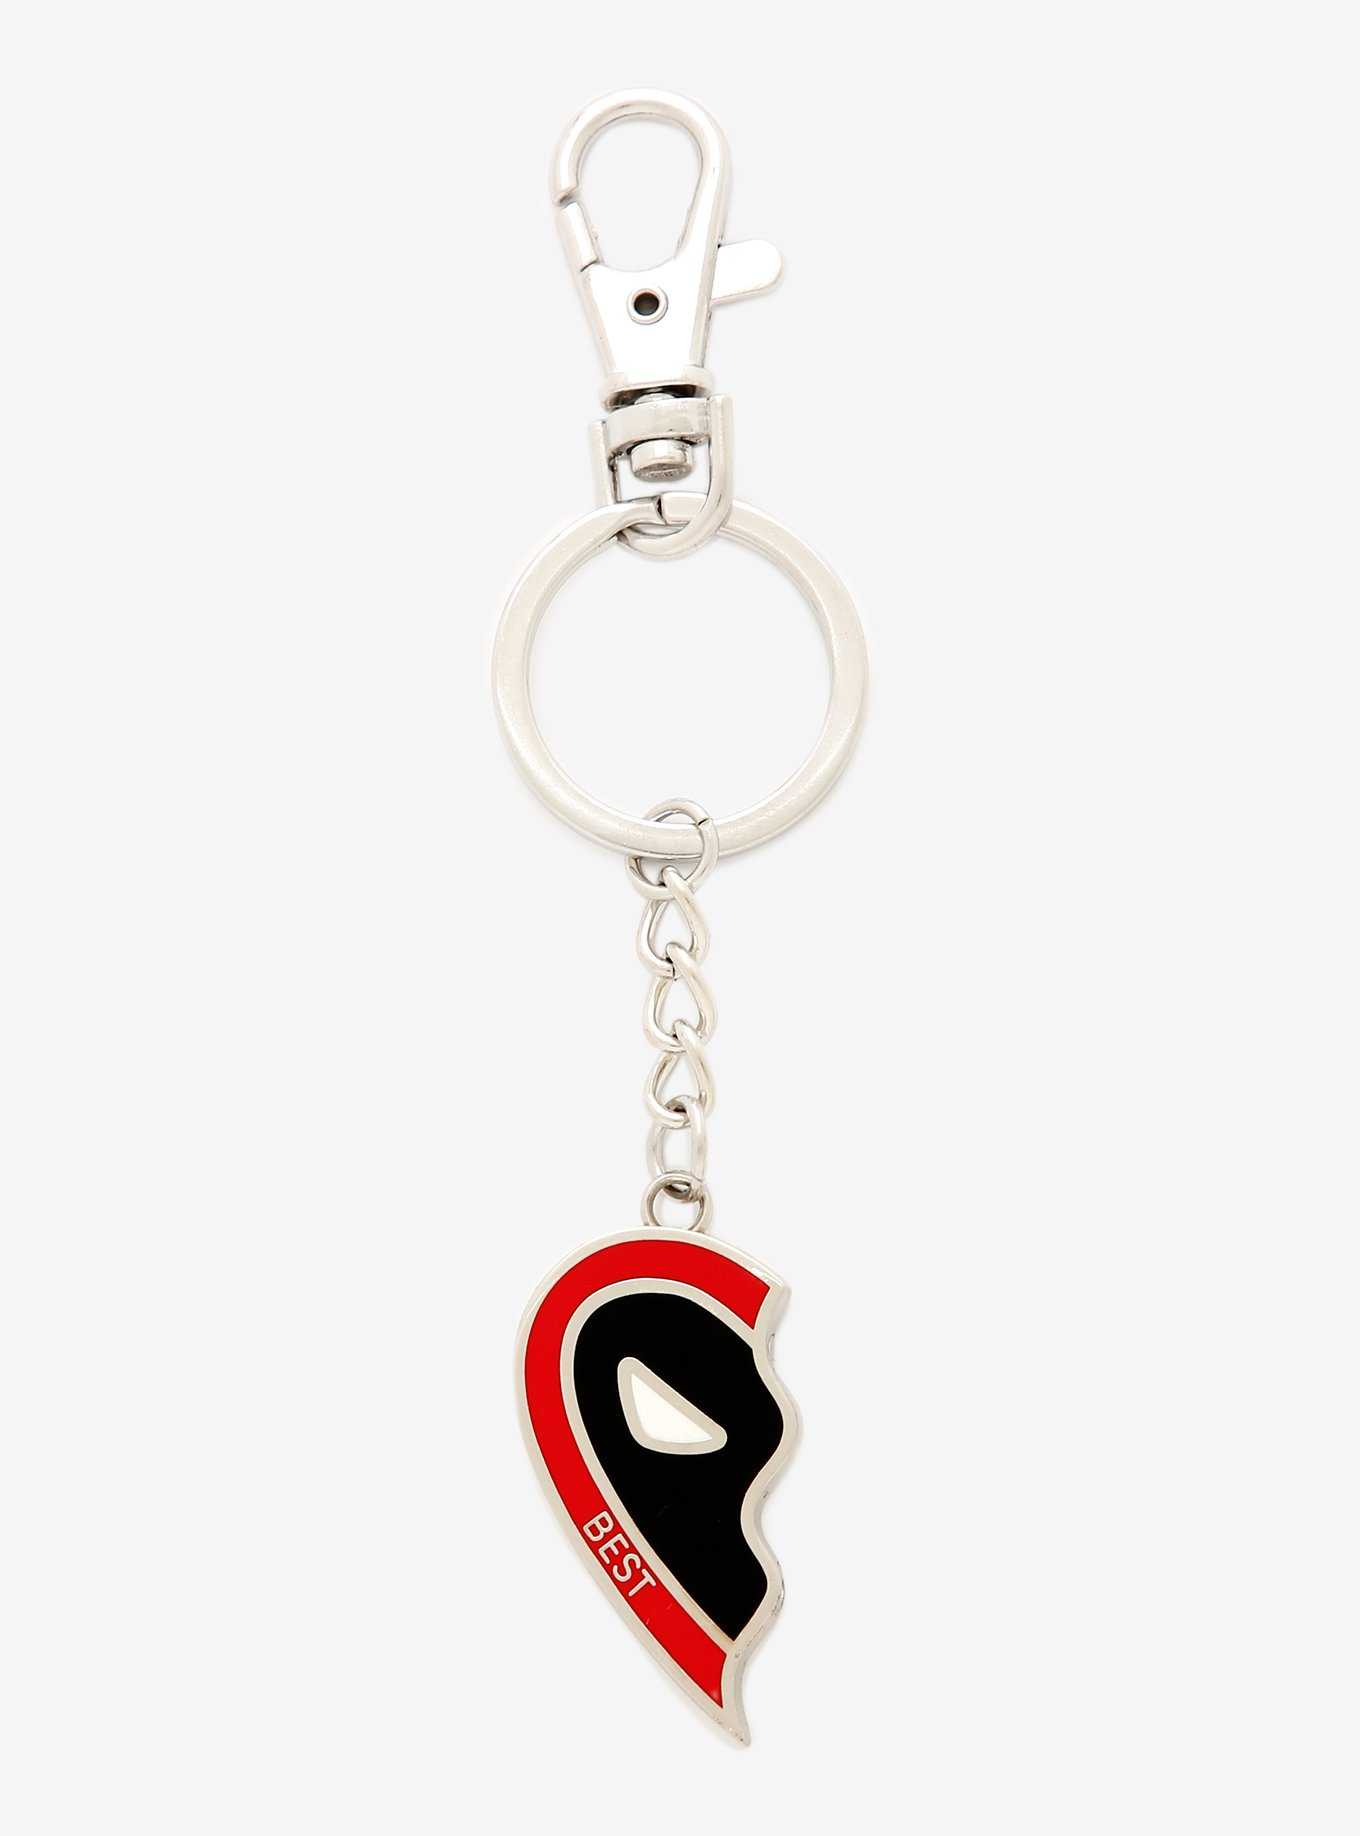 Marvel Deadpool & Wolverine Best Friends Heart Magnetic Keychain Set - BoxLunch Exclusive, , hi-res